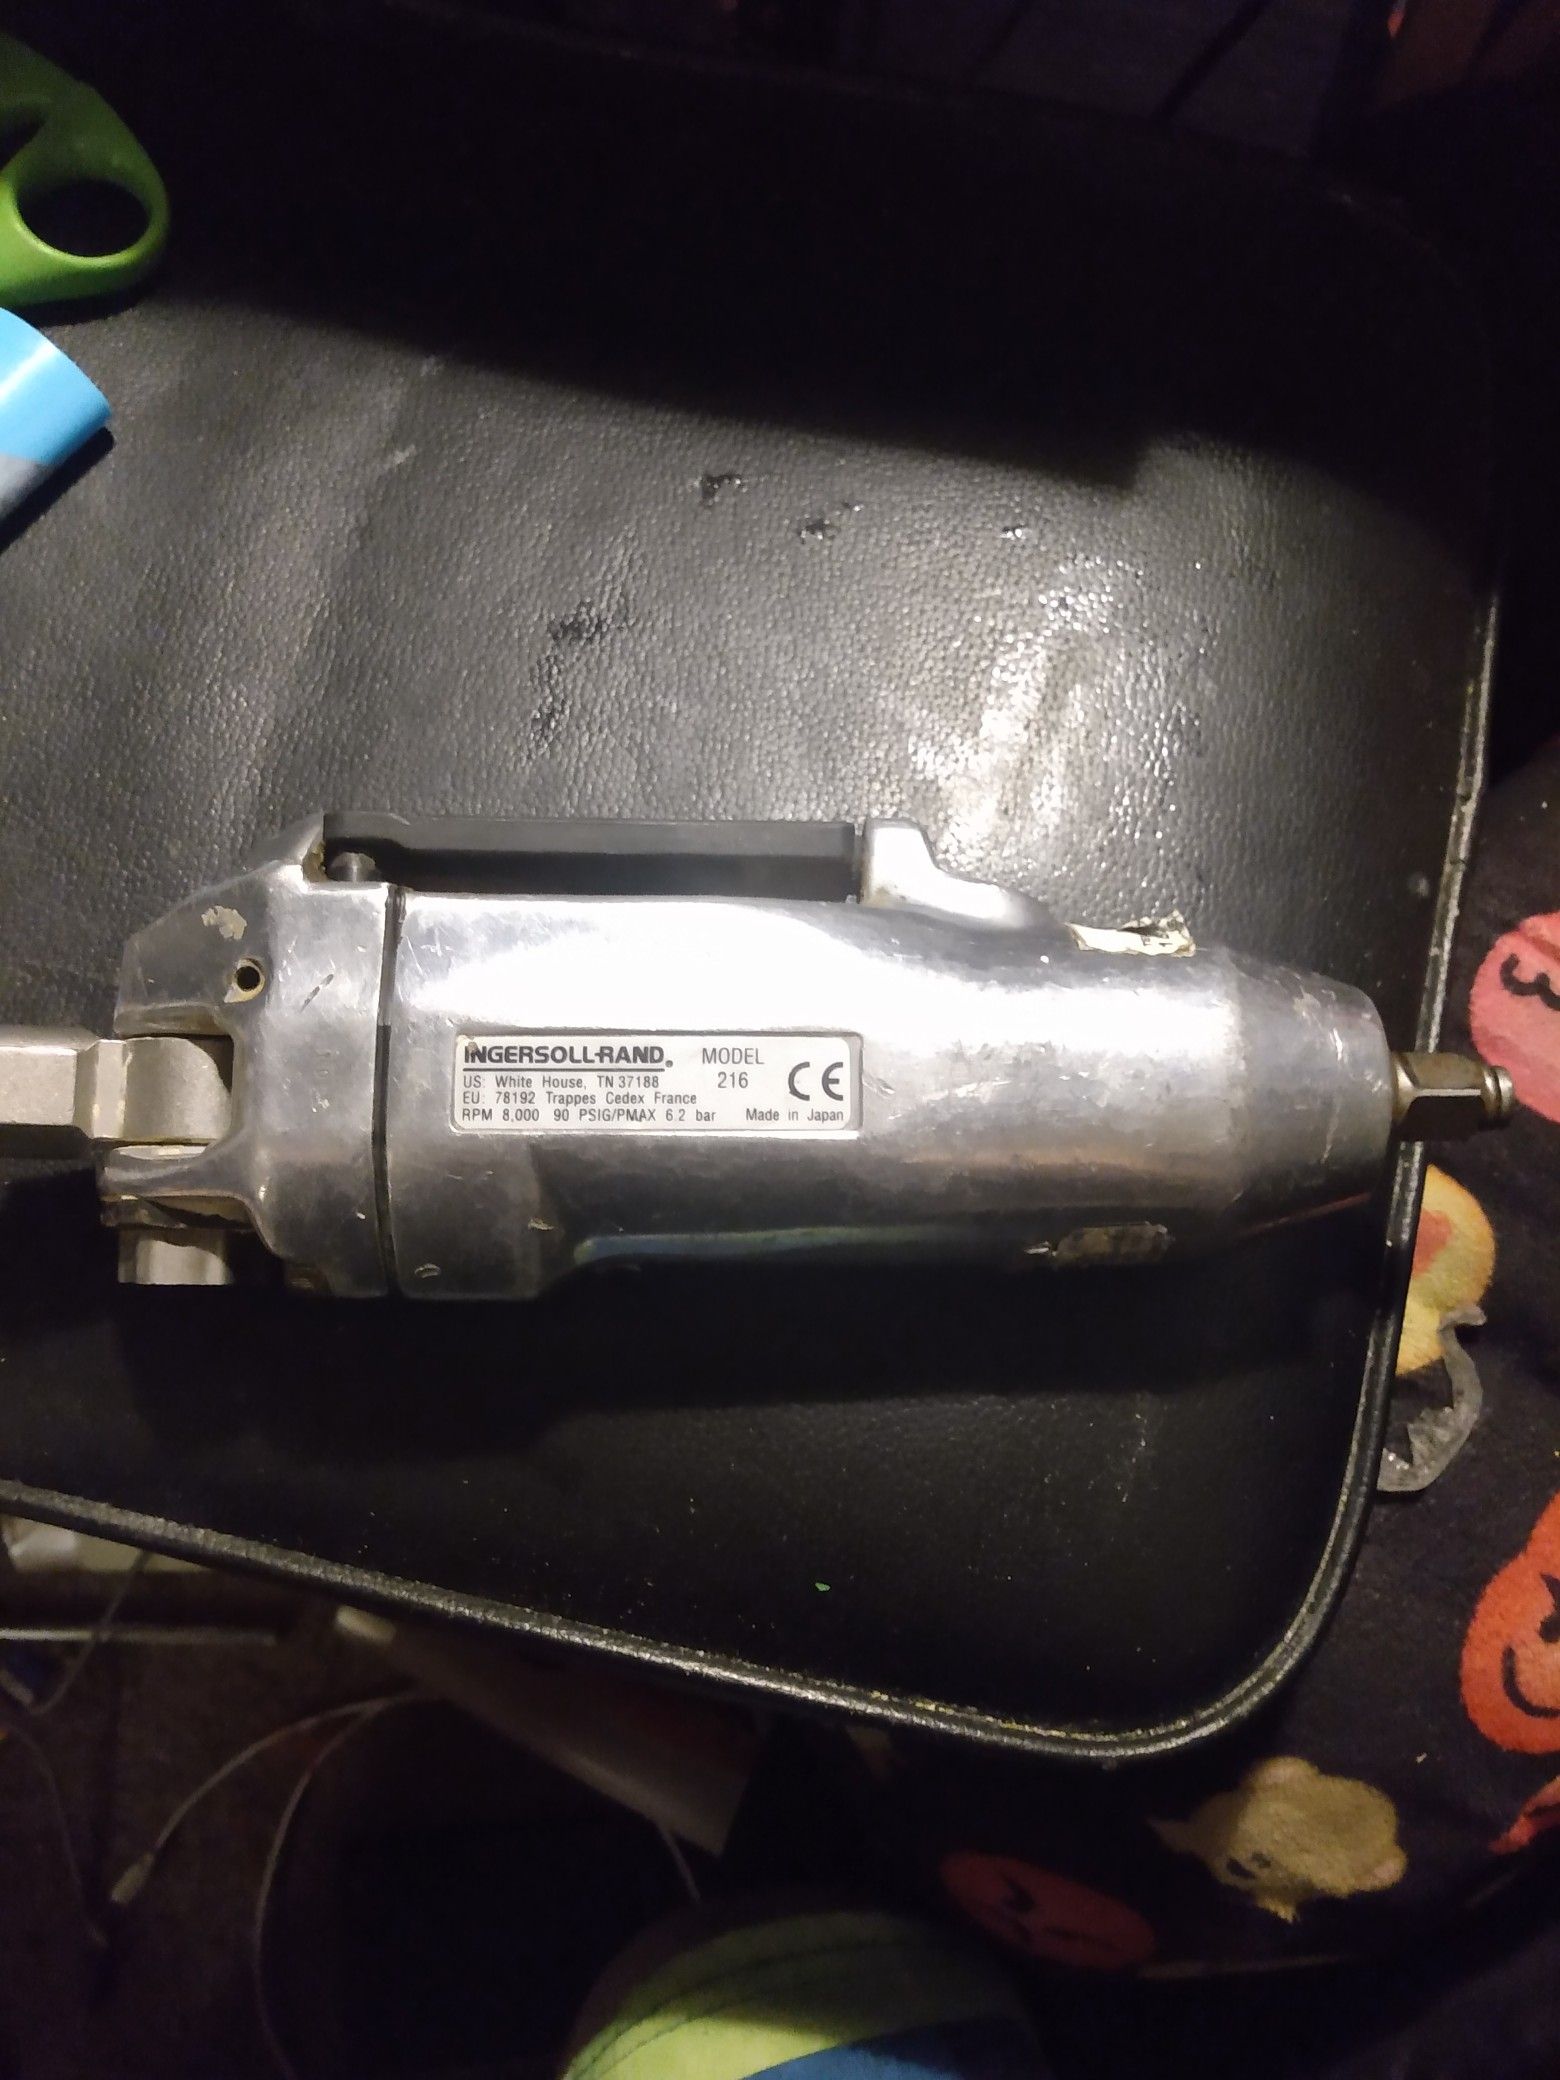 Ingersoll Rand model 216 air wrench